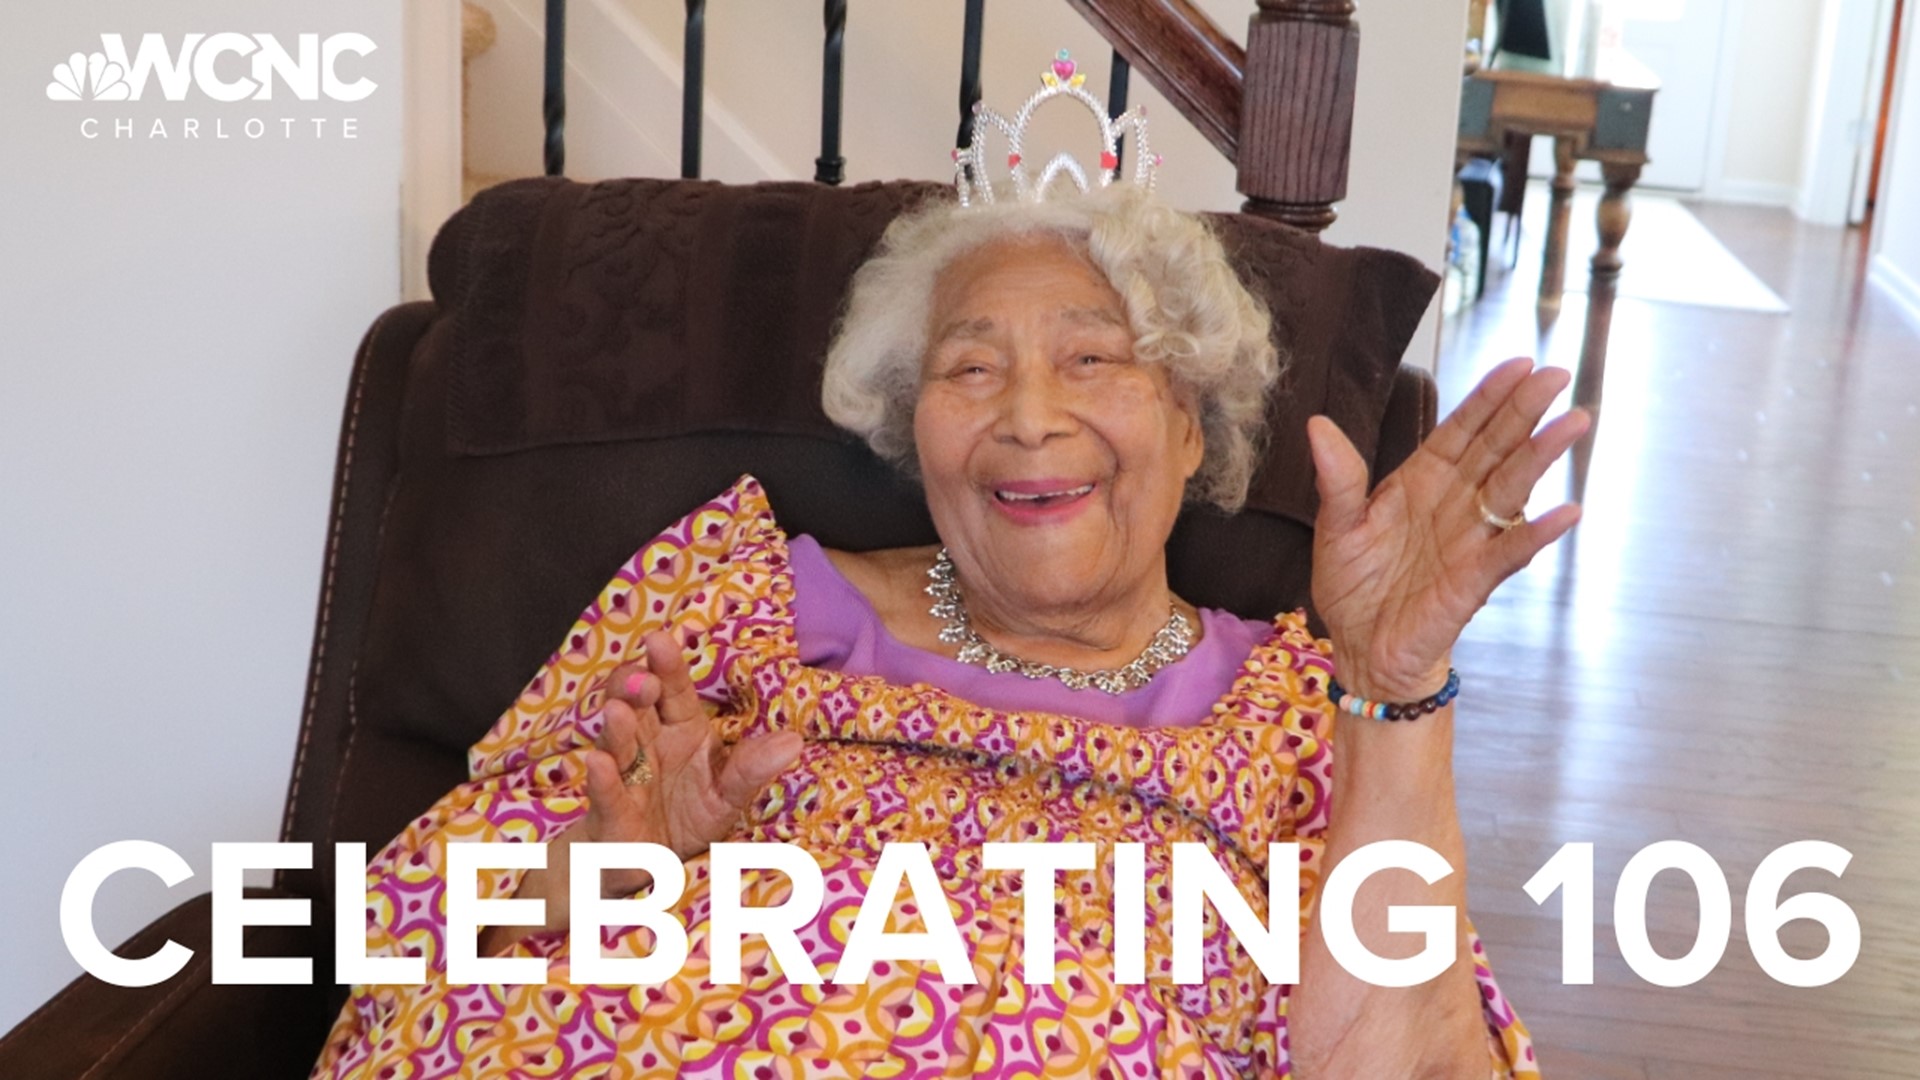 Ms. Gussie will be celebrating with friends and family as she turns 106 today. She grew up in Greenville, South Carolina.